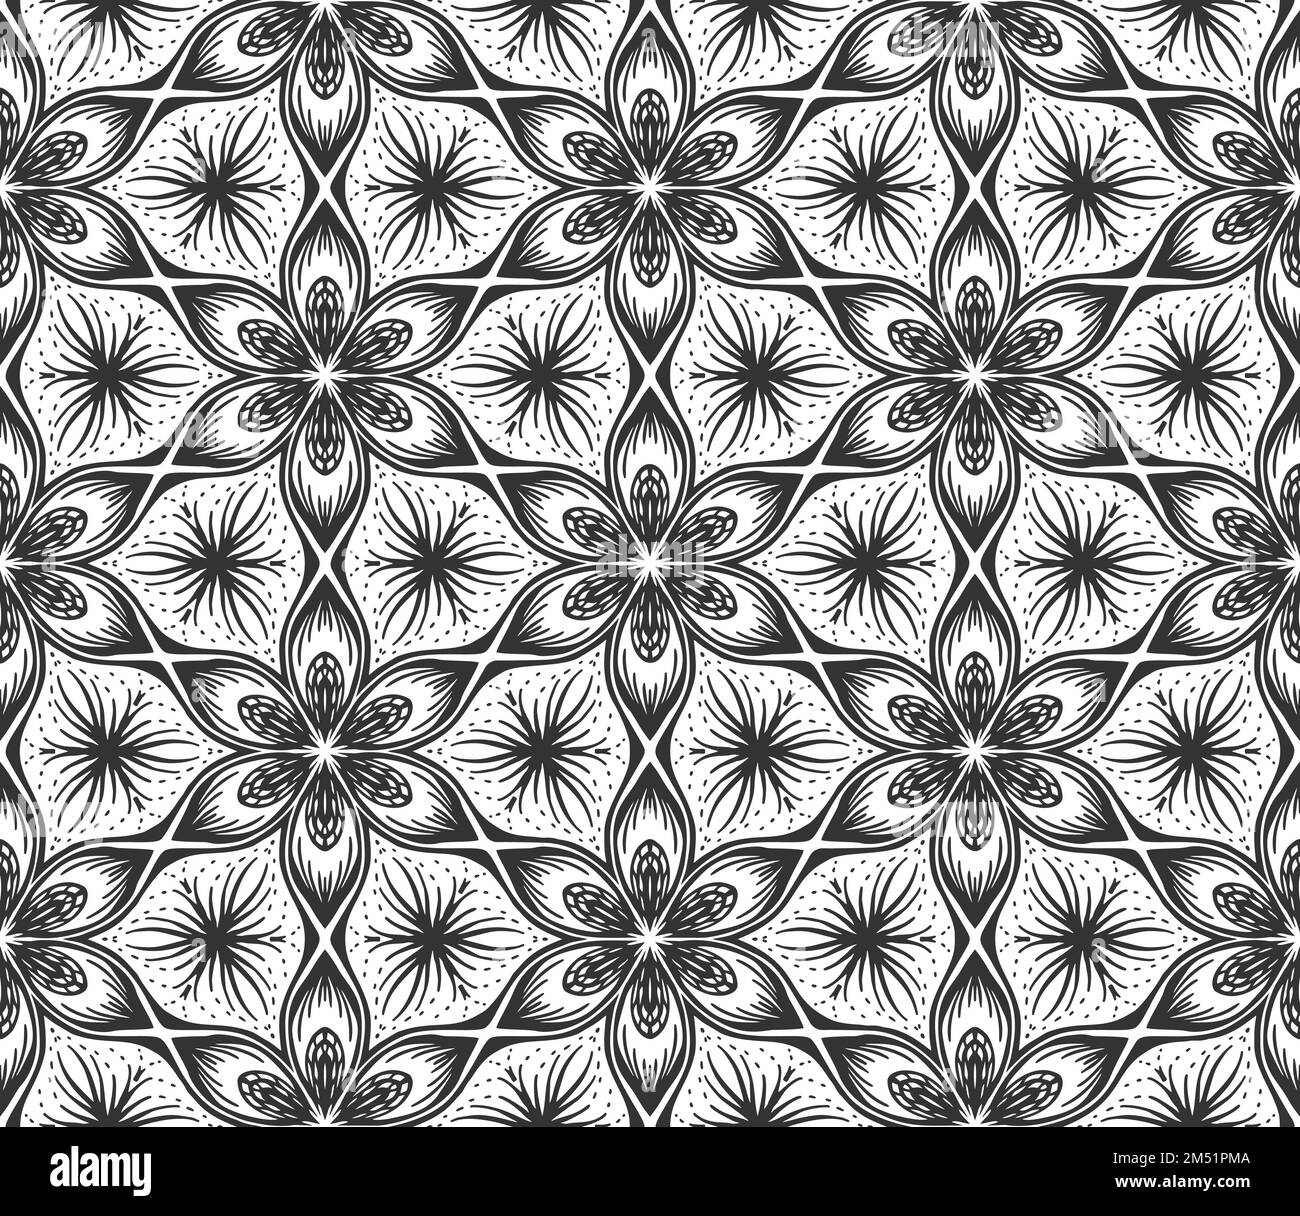 Geometry abstract white flower paper cut seamless pattern. Stock Vector